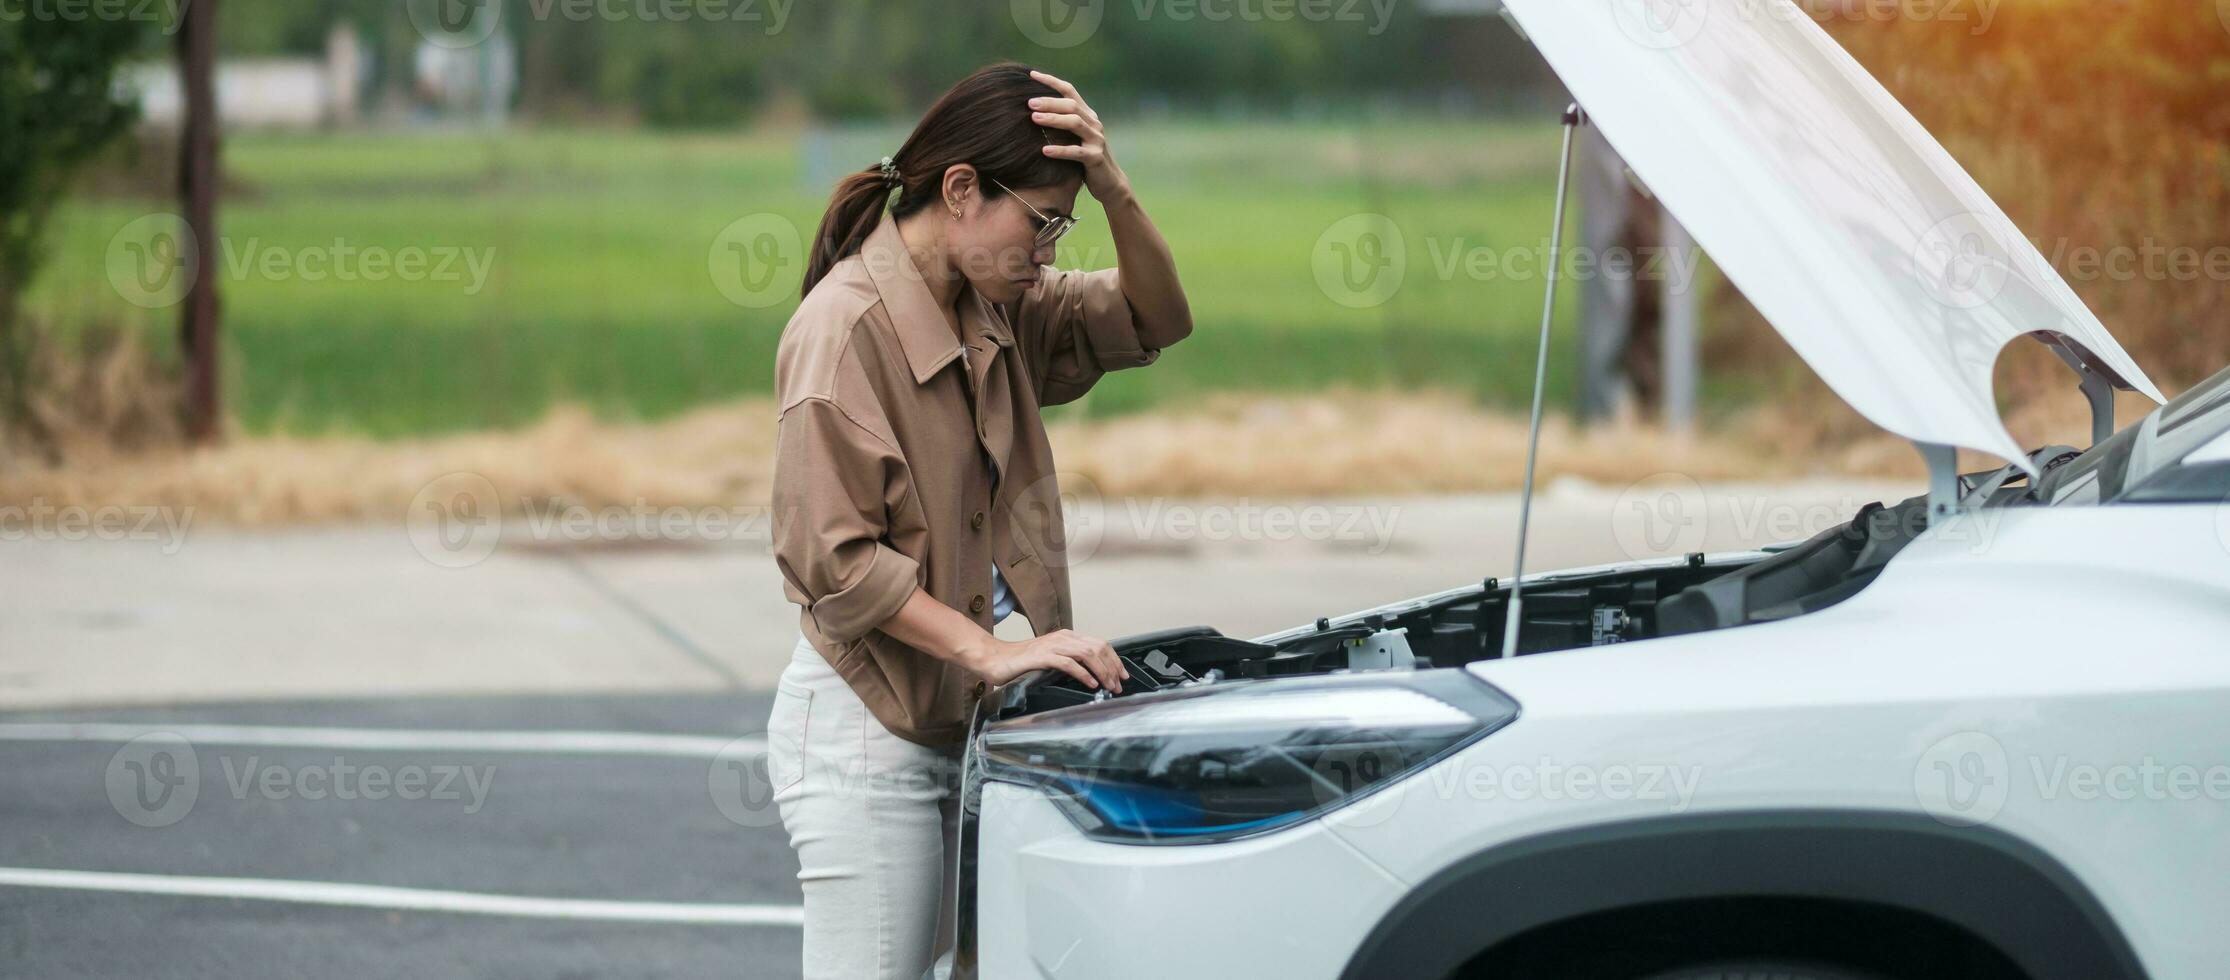 woman driver standing near a problem car. Breakdown or broken car on road. Vehicle Insurance, maintenance and service concept photo